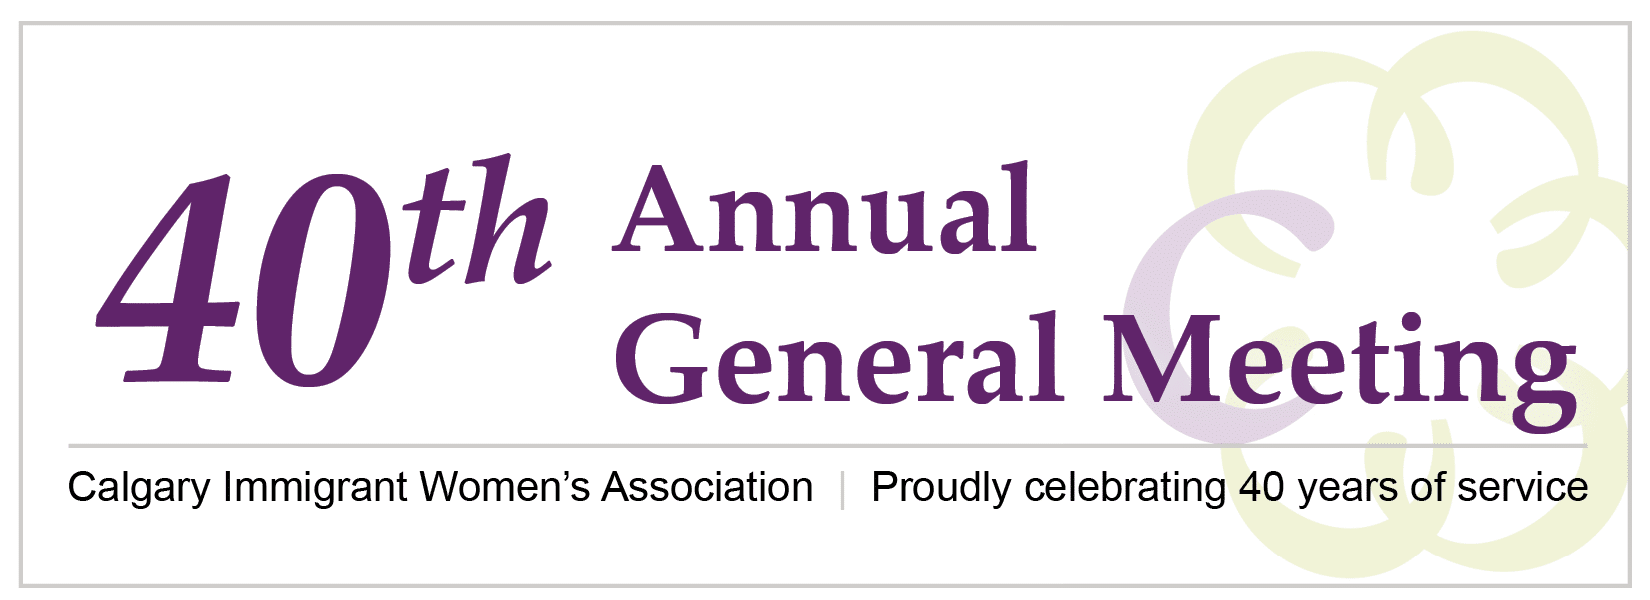 40th Annual General Meeting